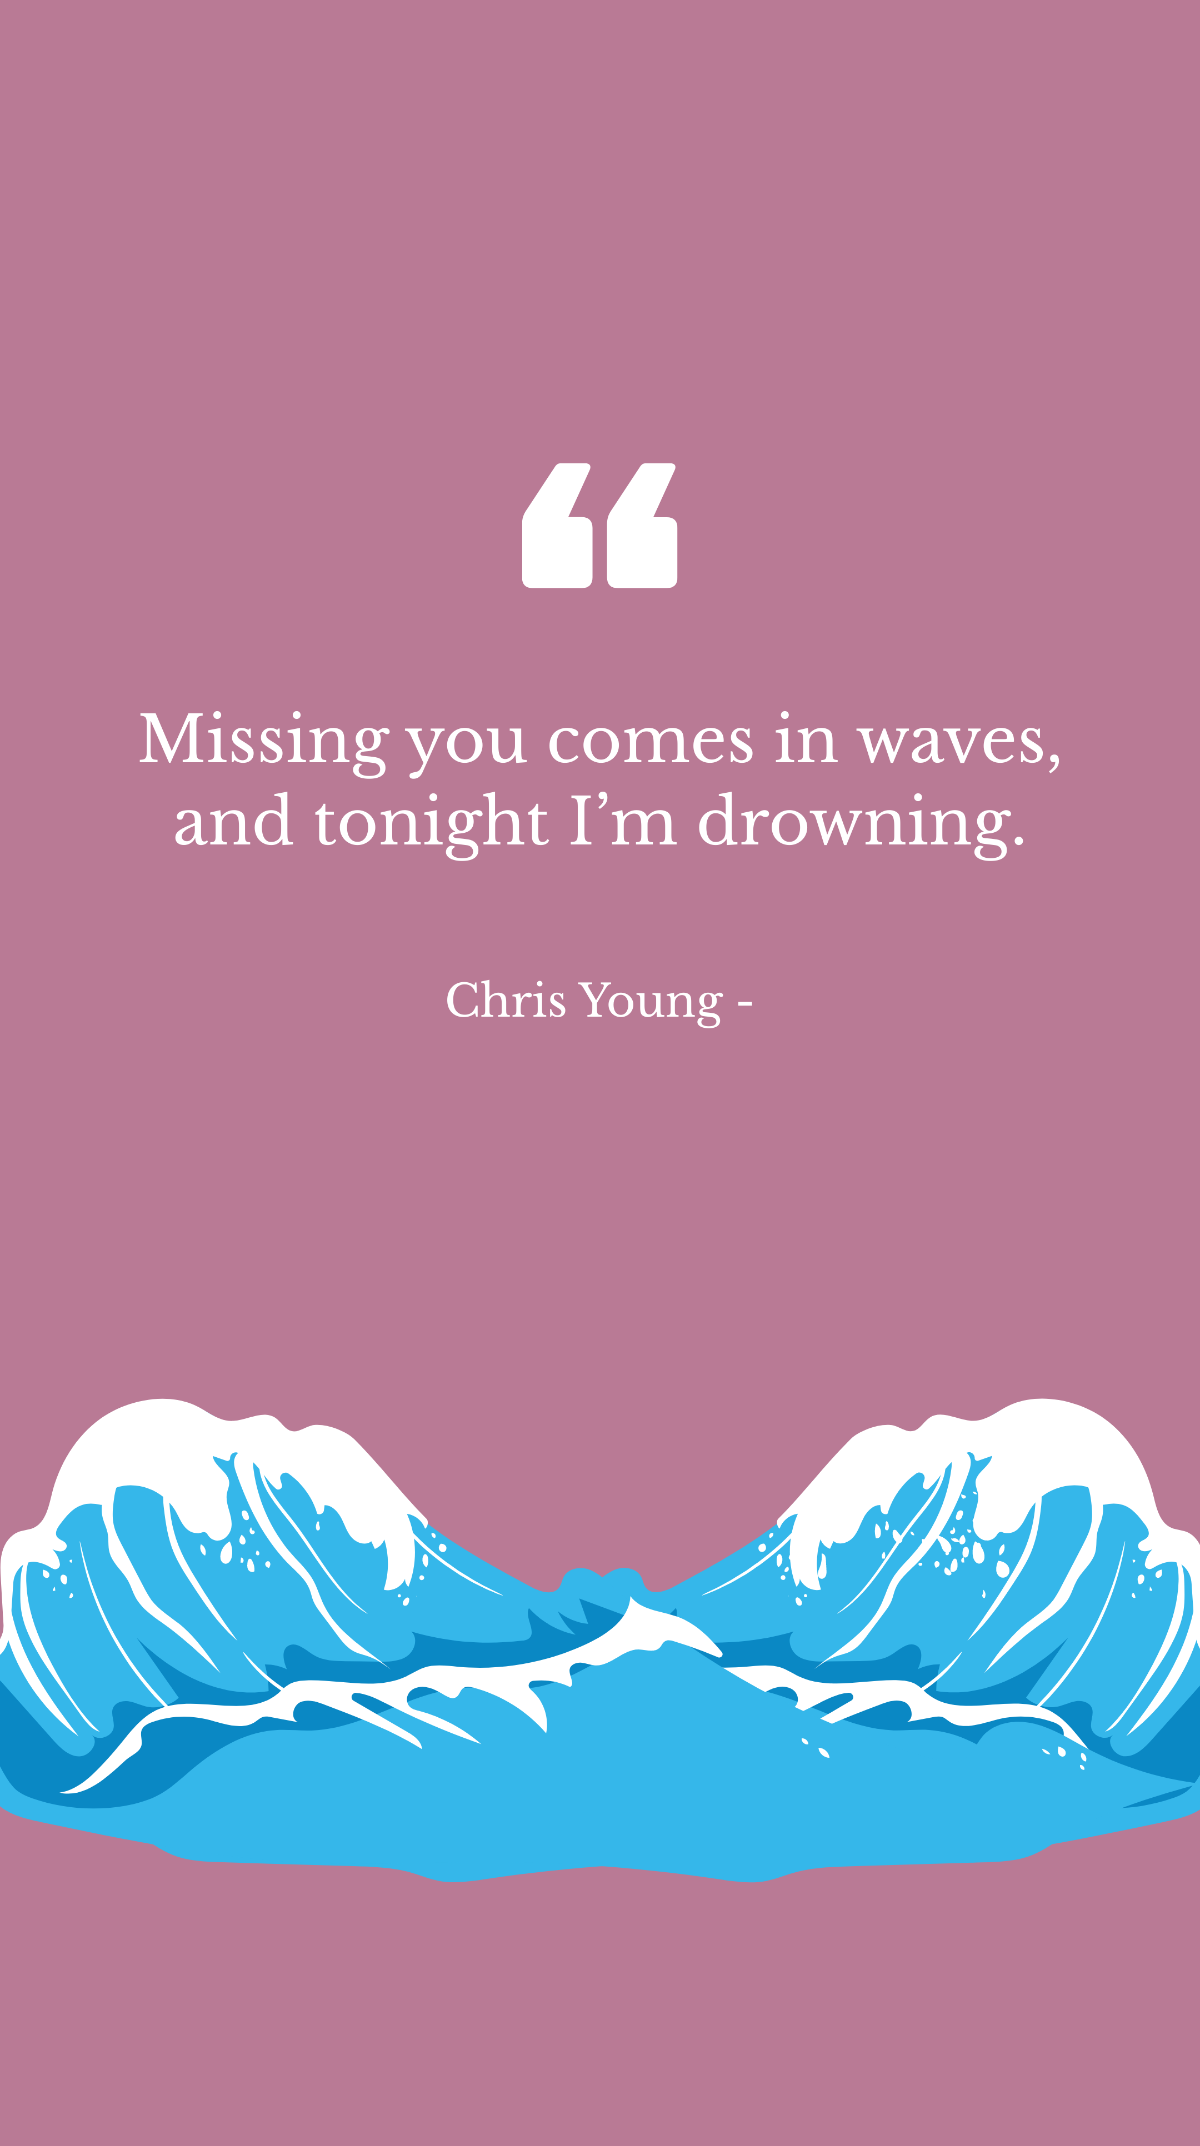 Chris Young - Missing you comes in waves, and tonight I’m drowning.